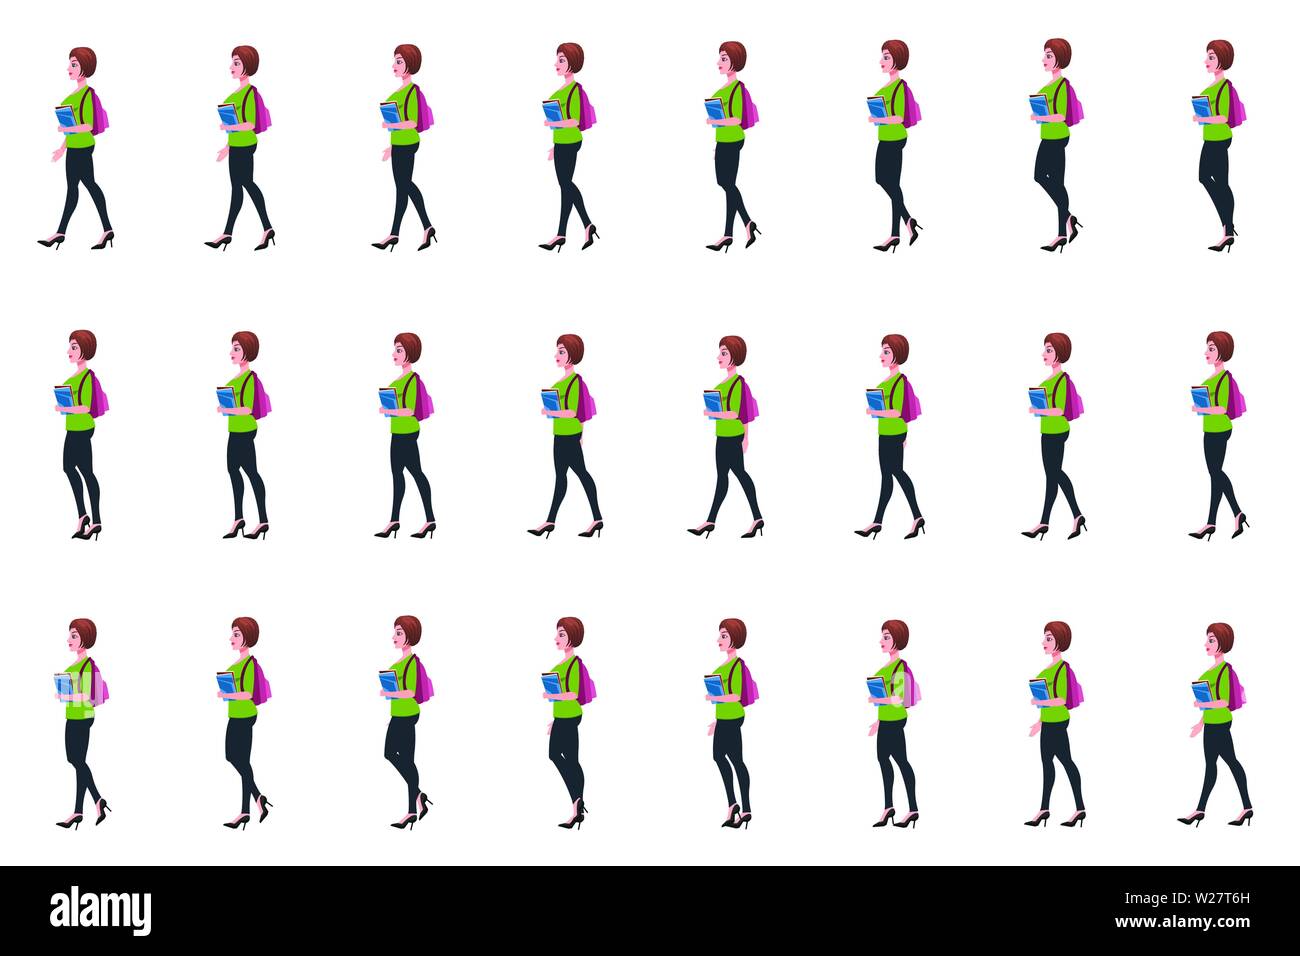 Mädchen Student Character Walk Cycle Animationssequenz, Loop Animation Sprite Sheet Stock Vektor